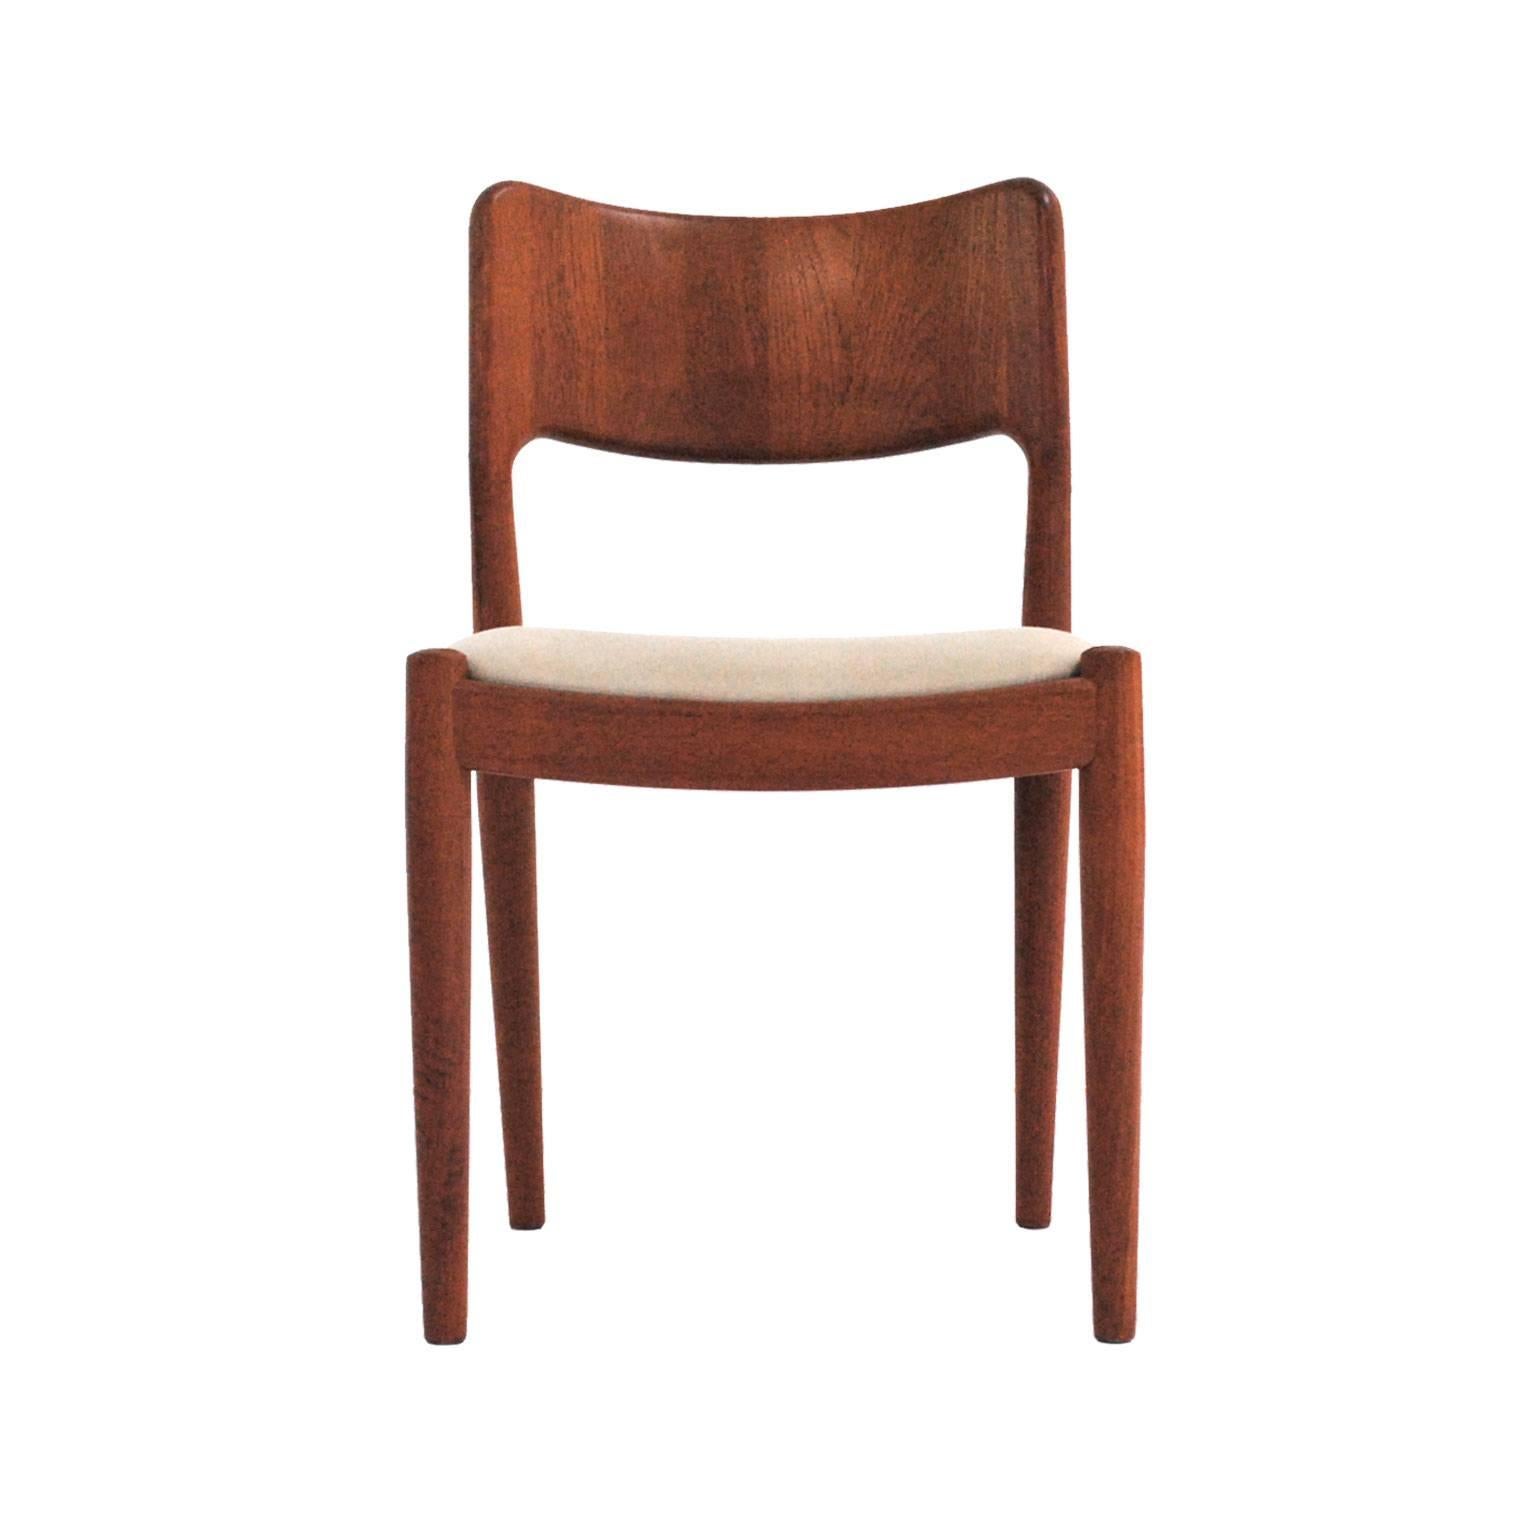 Set of four chairs designed by Niels Møller for J.L. Moller with structure made in solid cherrywood with seat upholstered in white wool.